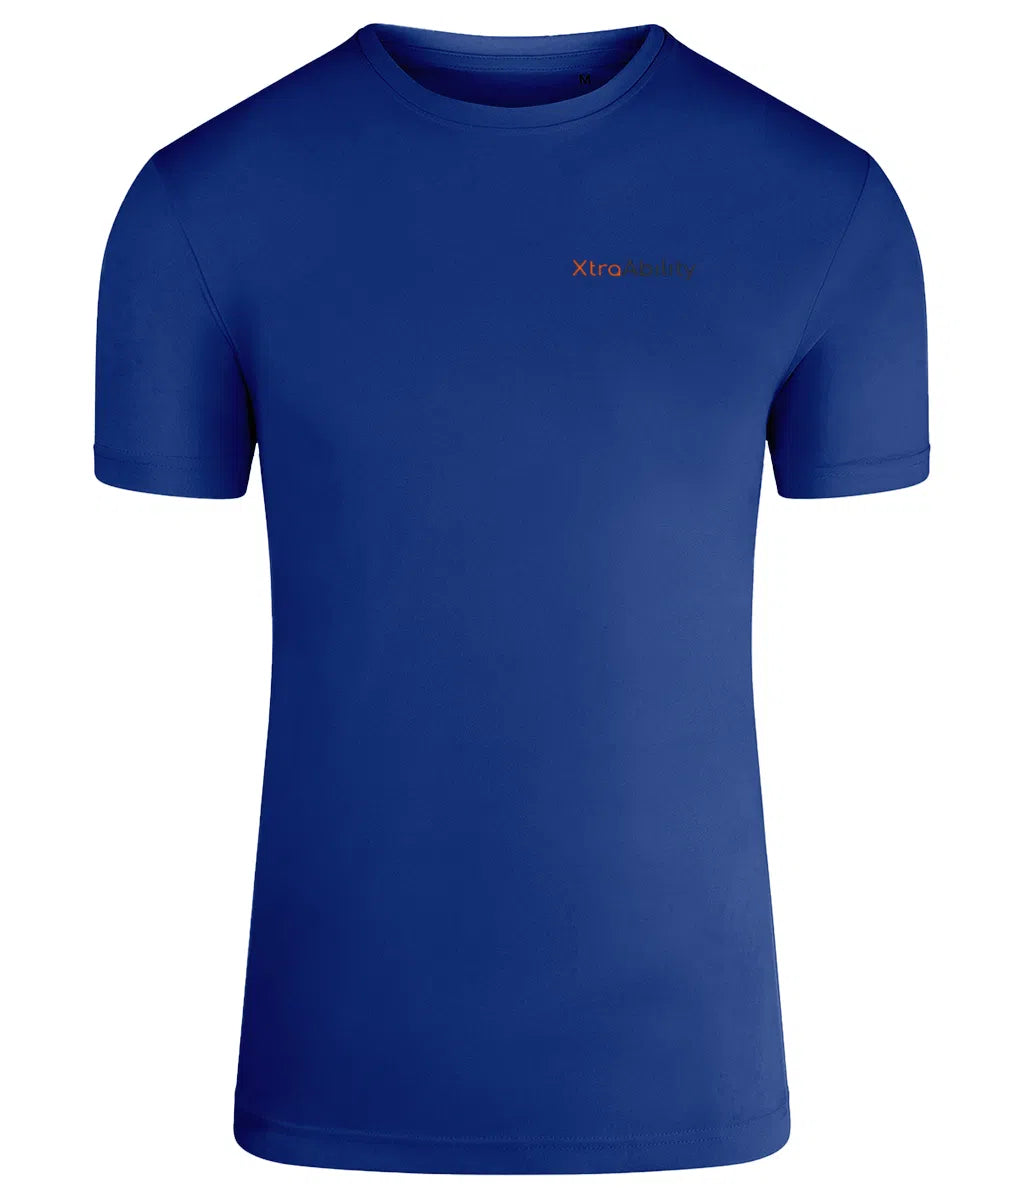 Recycled Performance Men's T-shirt - XtraAbility